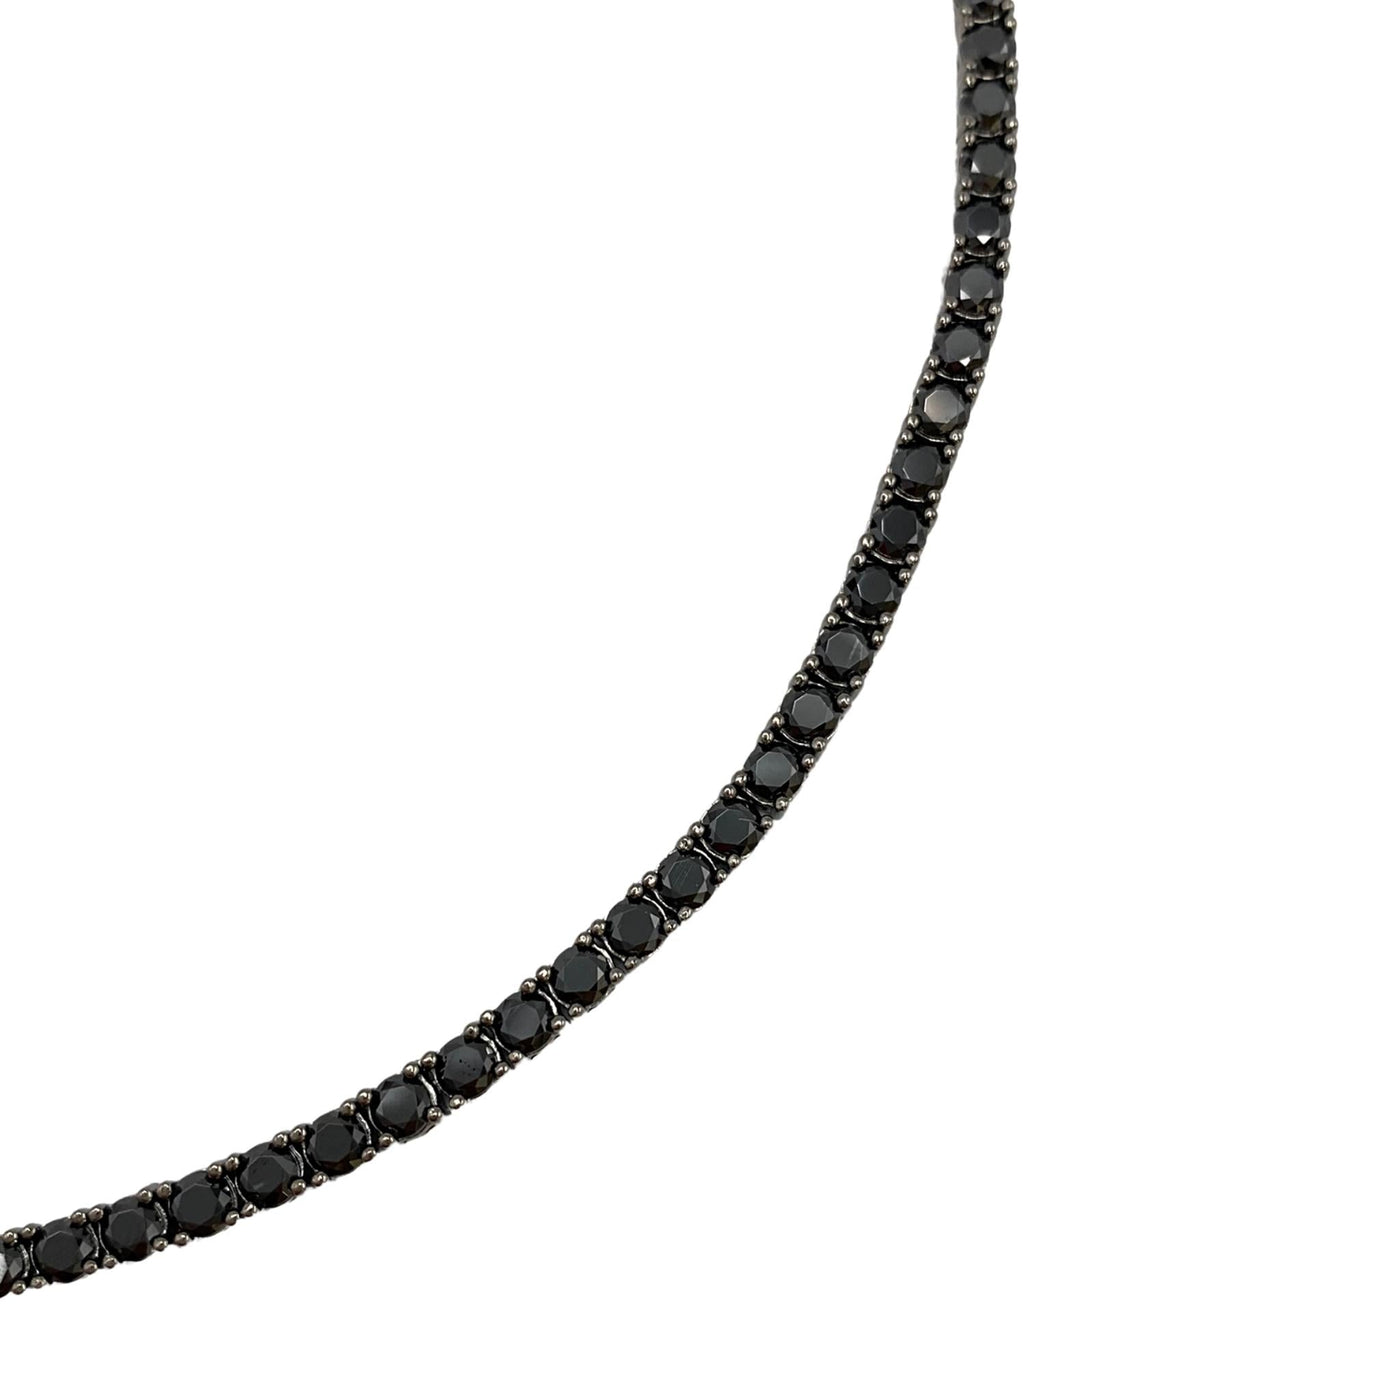 Silver casting tennis necklace with black zirconia - 3 mm